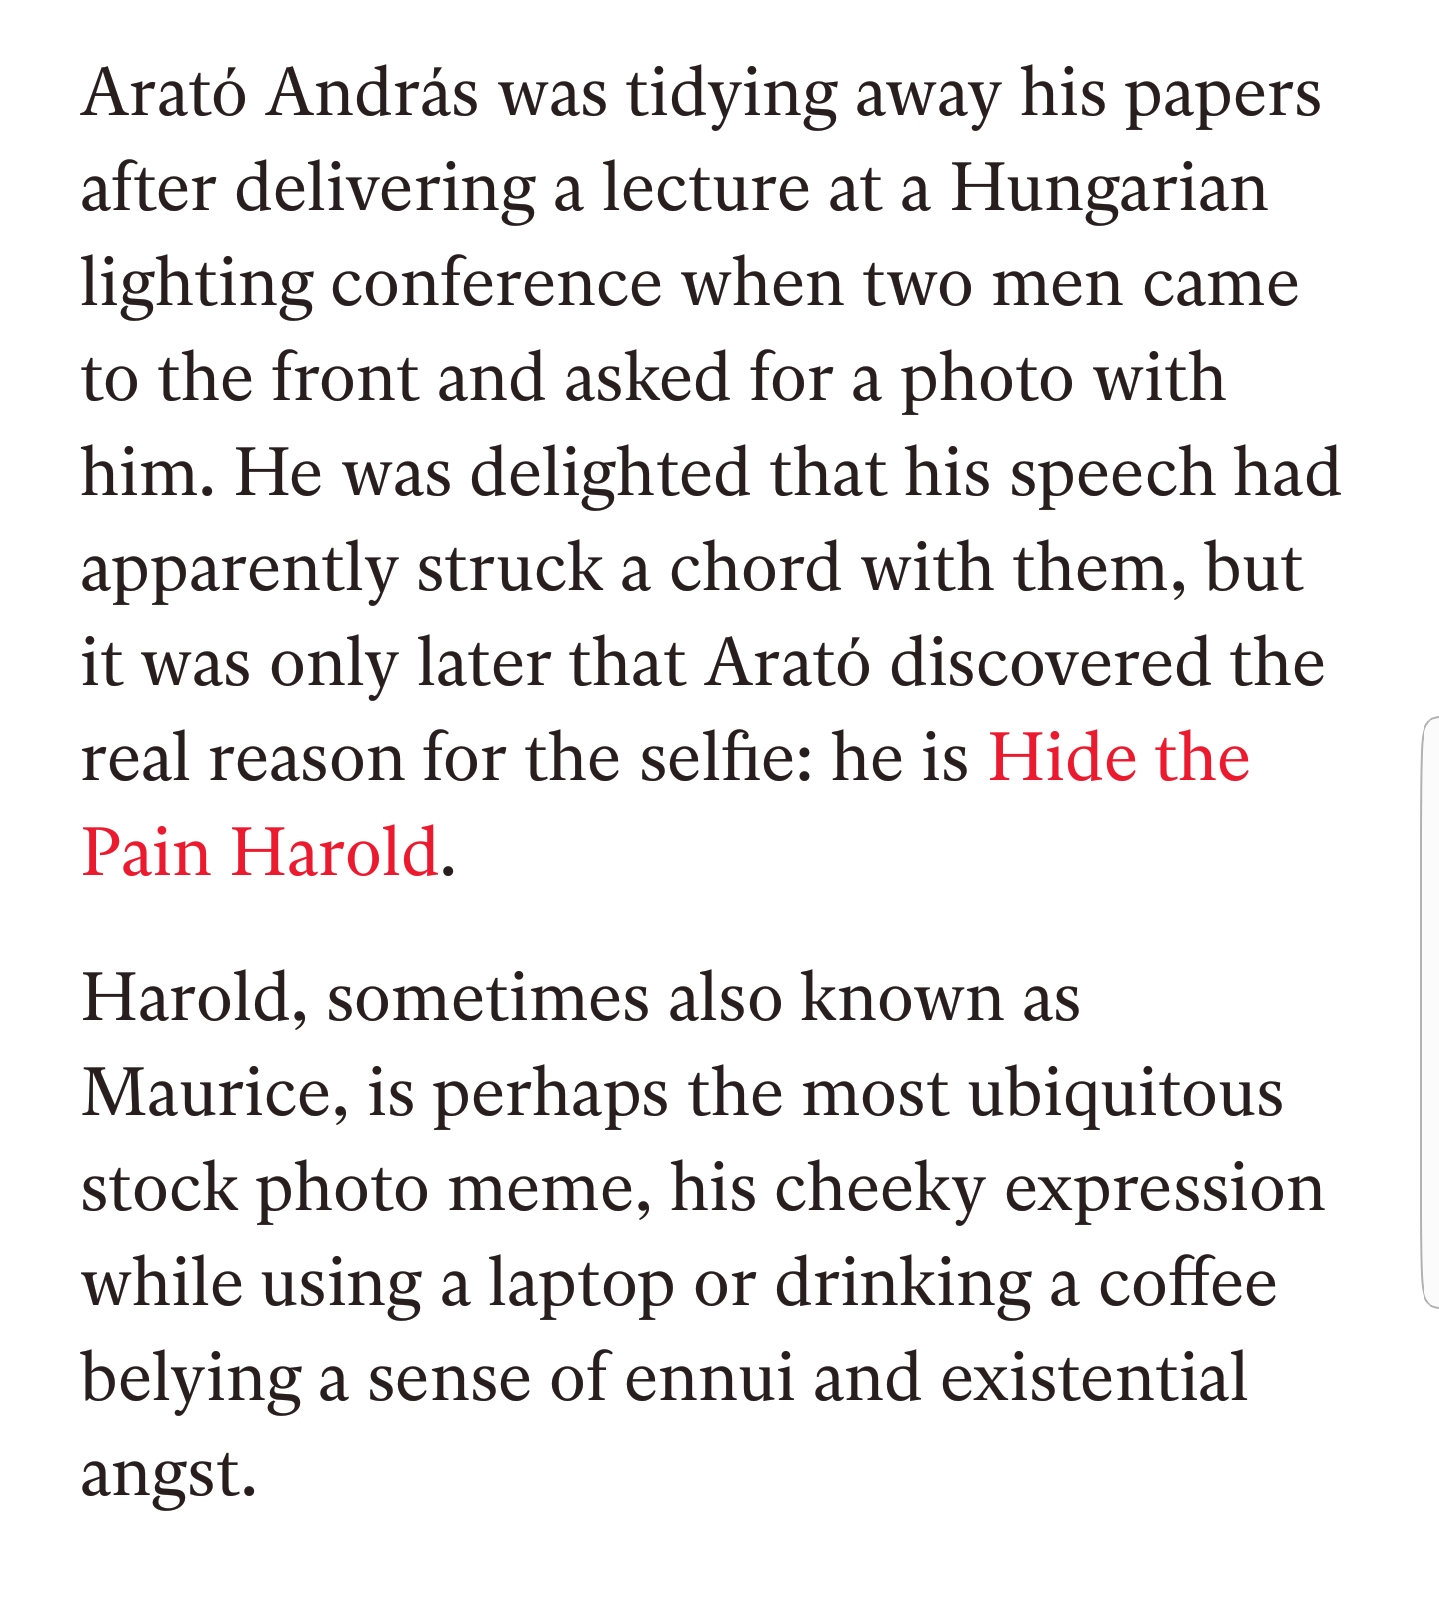 Claptrap - Arat Andrs was tidying away his papers after delivering a lecture at a Hungarian lighting conference when two men came to the front and asked for a photo with him. He was delighted that his speech had apparently struck a chord with them, but it